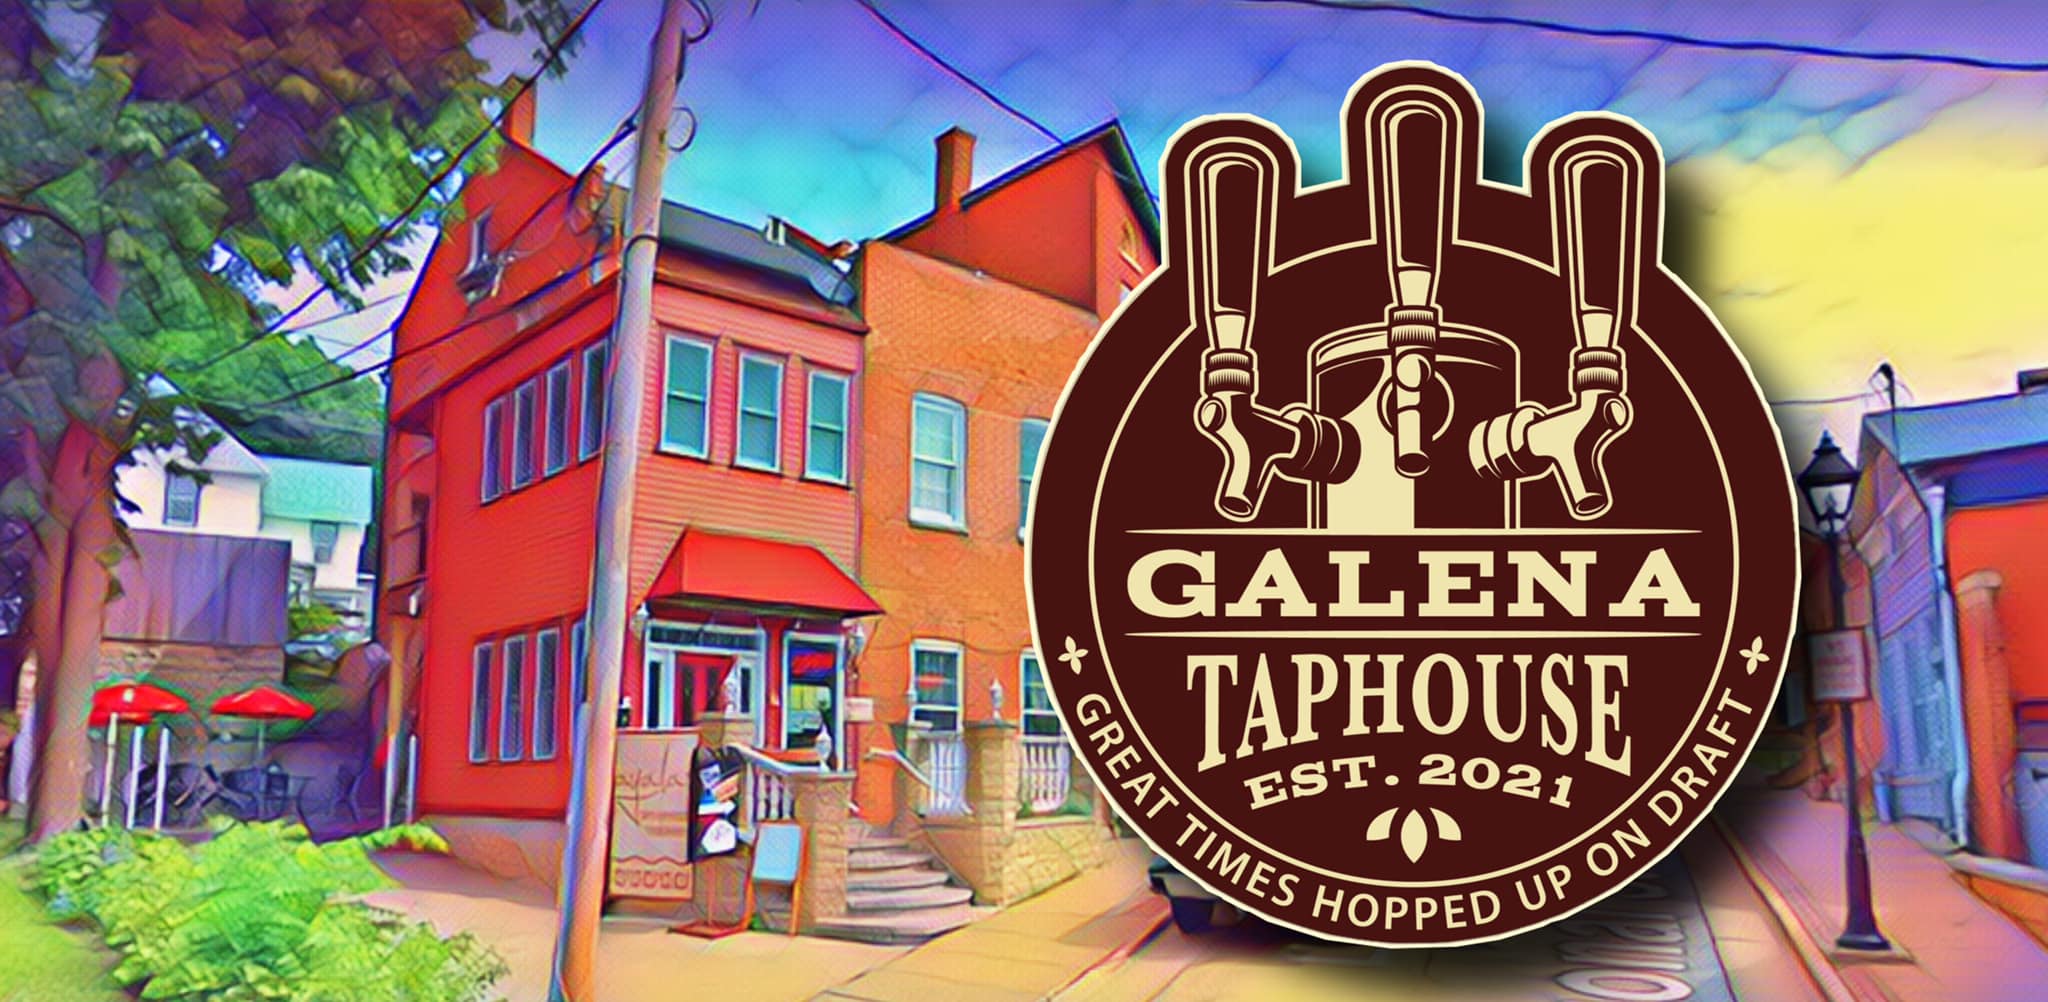 Galena Taphouse